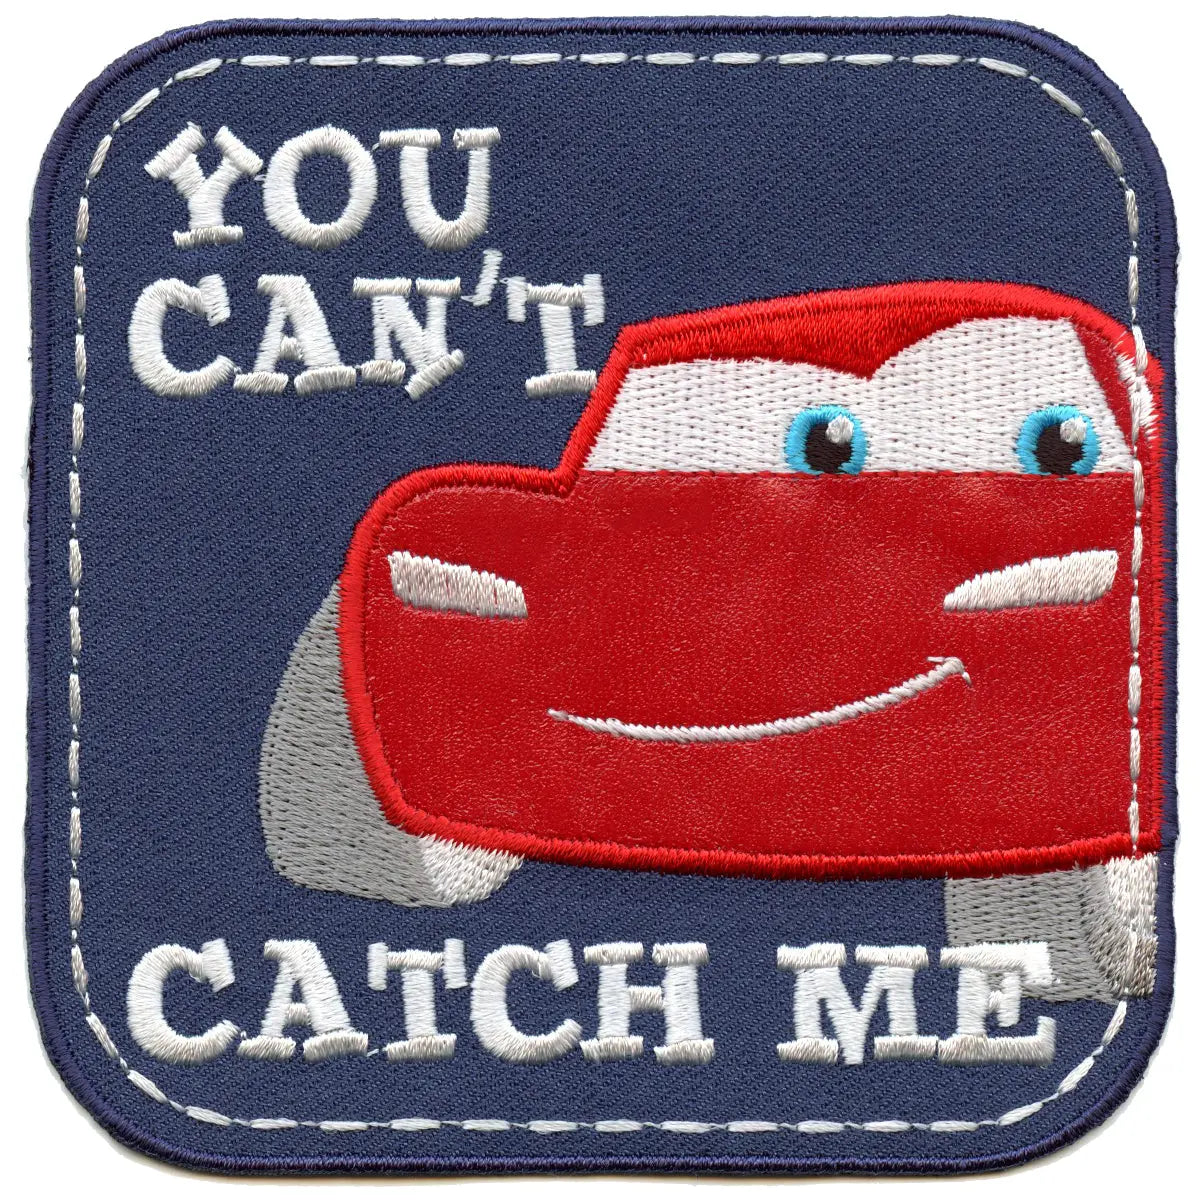 Disney Cars You Can't Catch Me Embroidered Applique Patch 